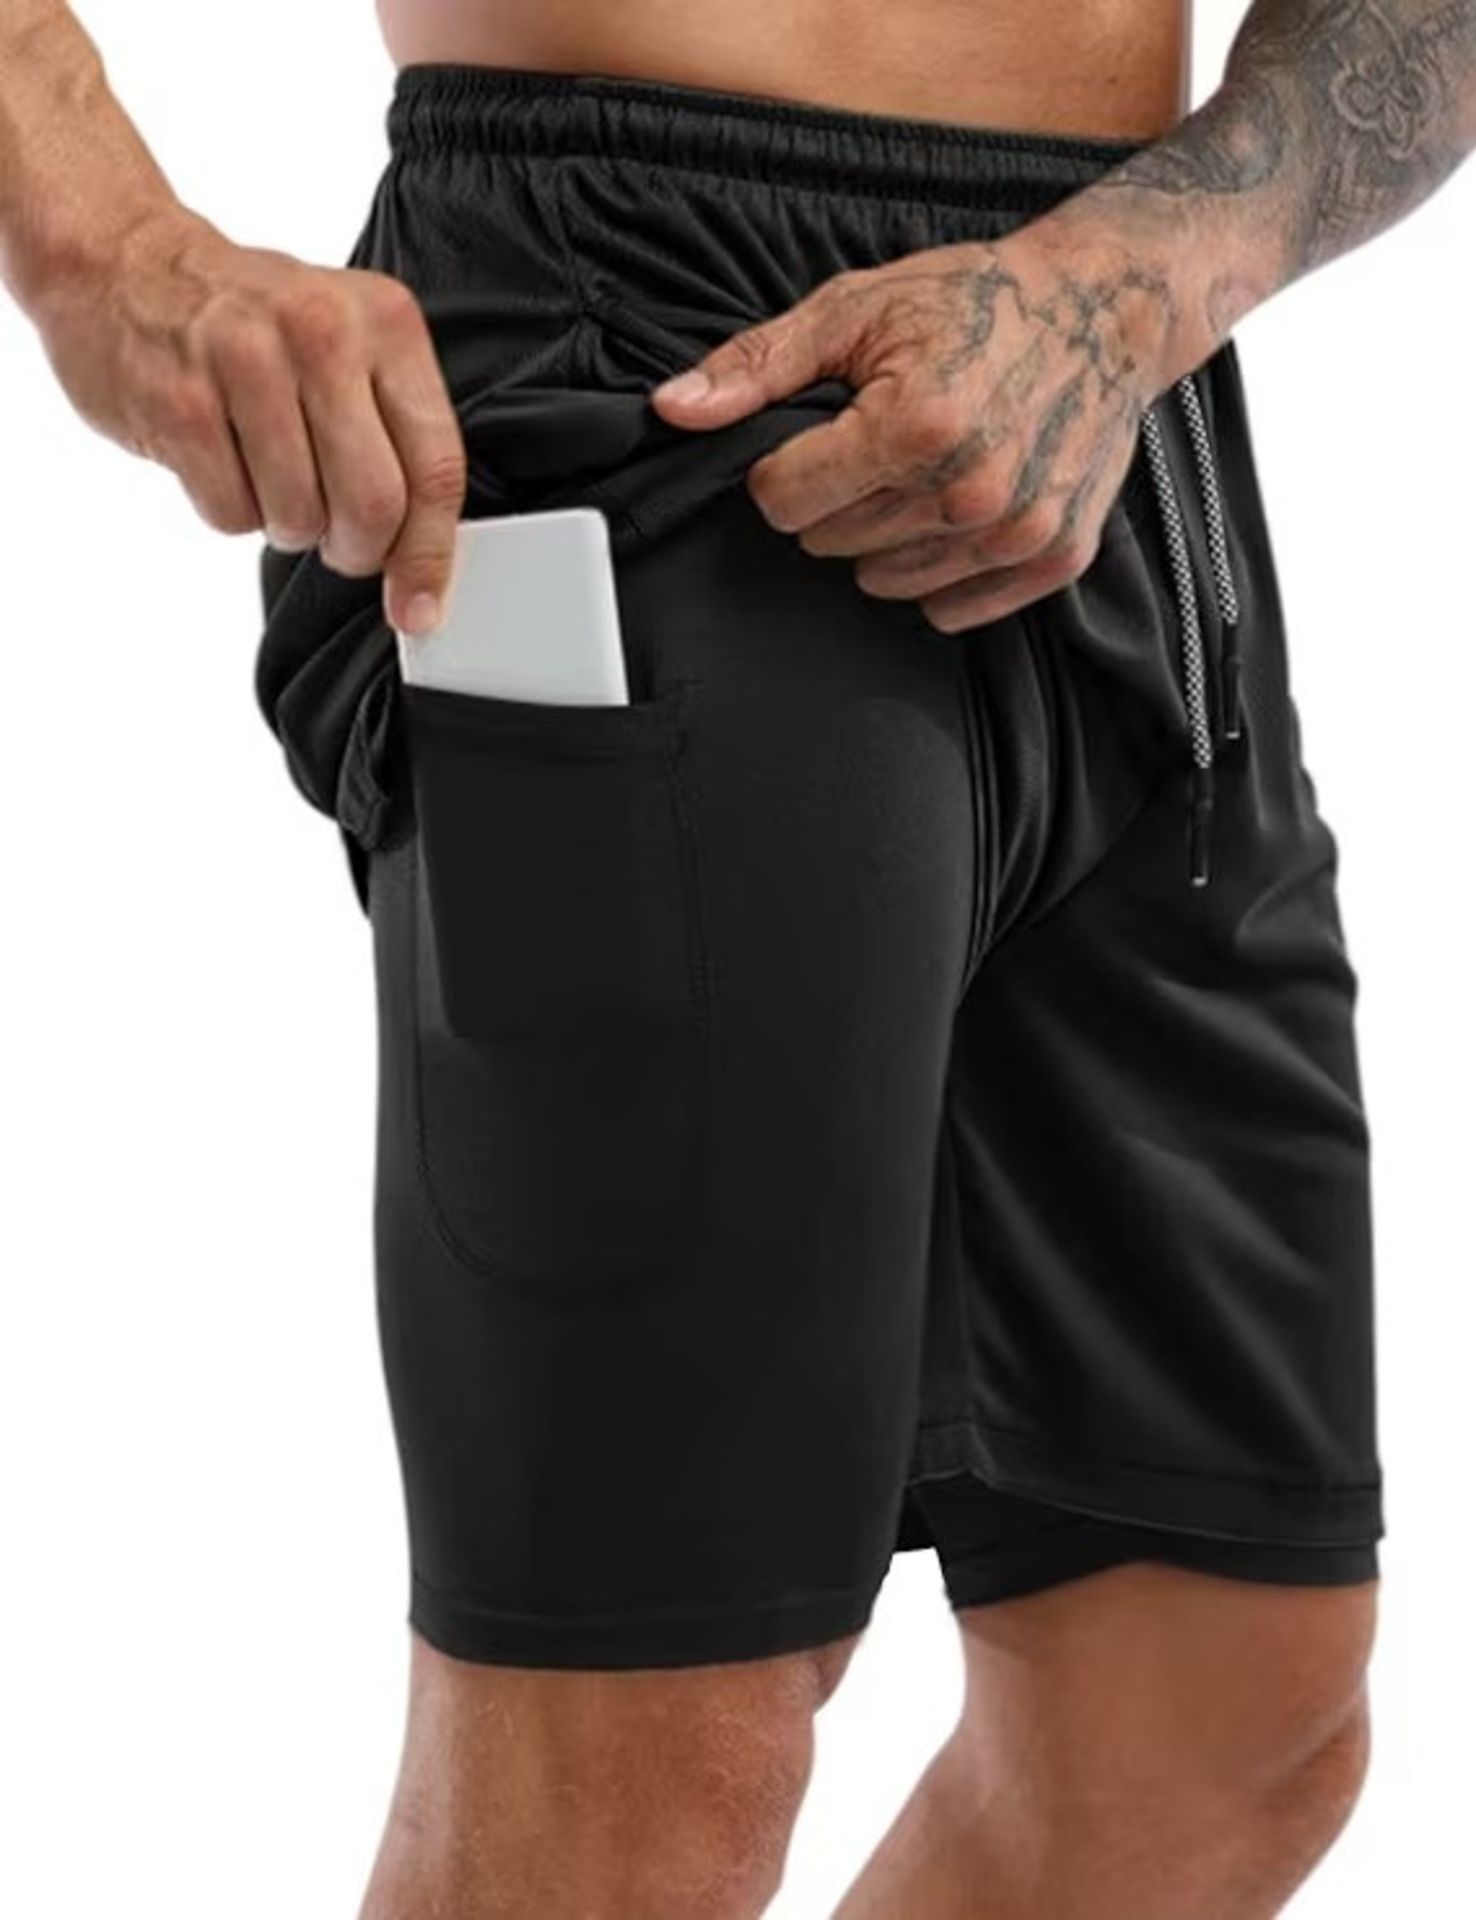 [NEW] Mens Sport Shorts Summer 2 in 1 Quick Drying Breathable Fitness Running Shorts G - Image 2 of 2